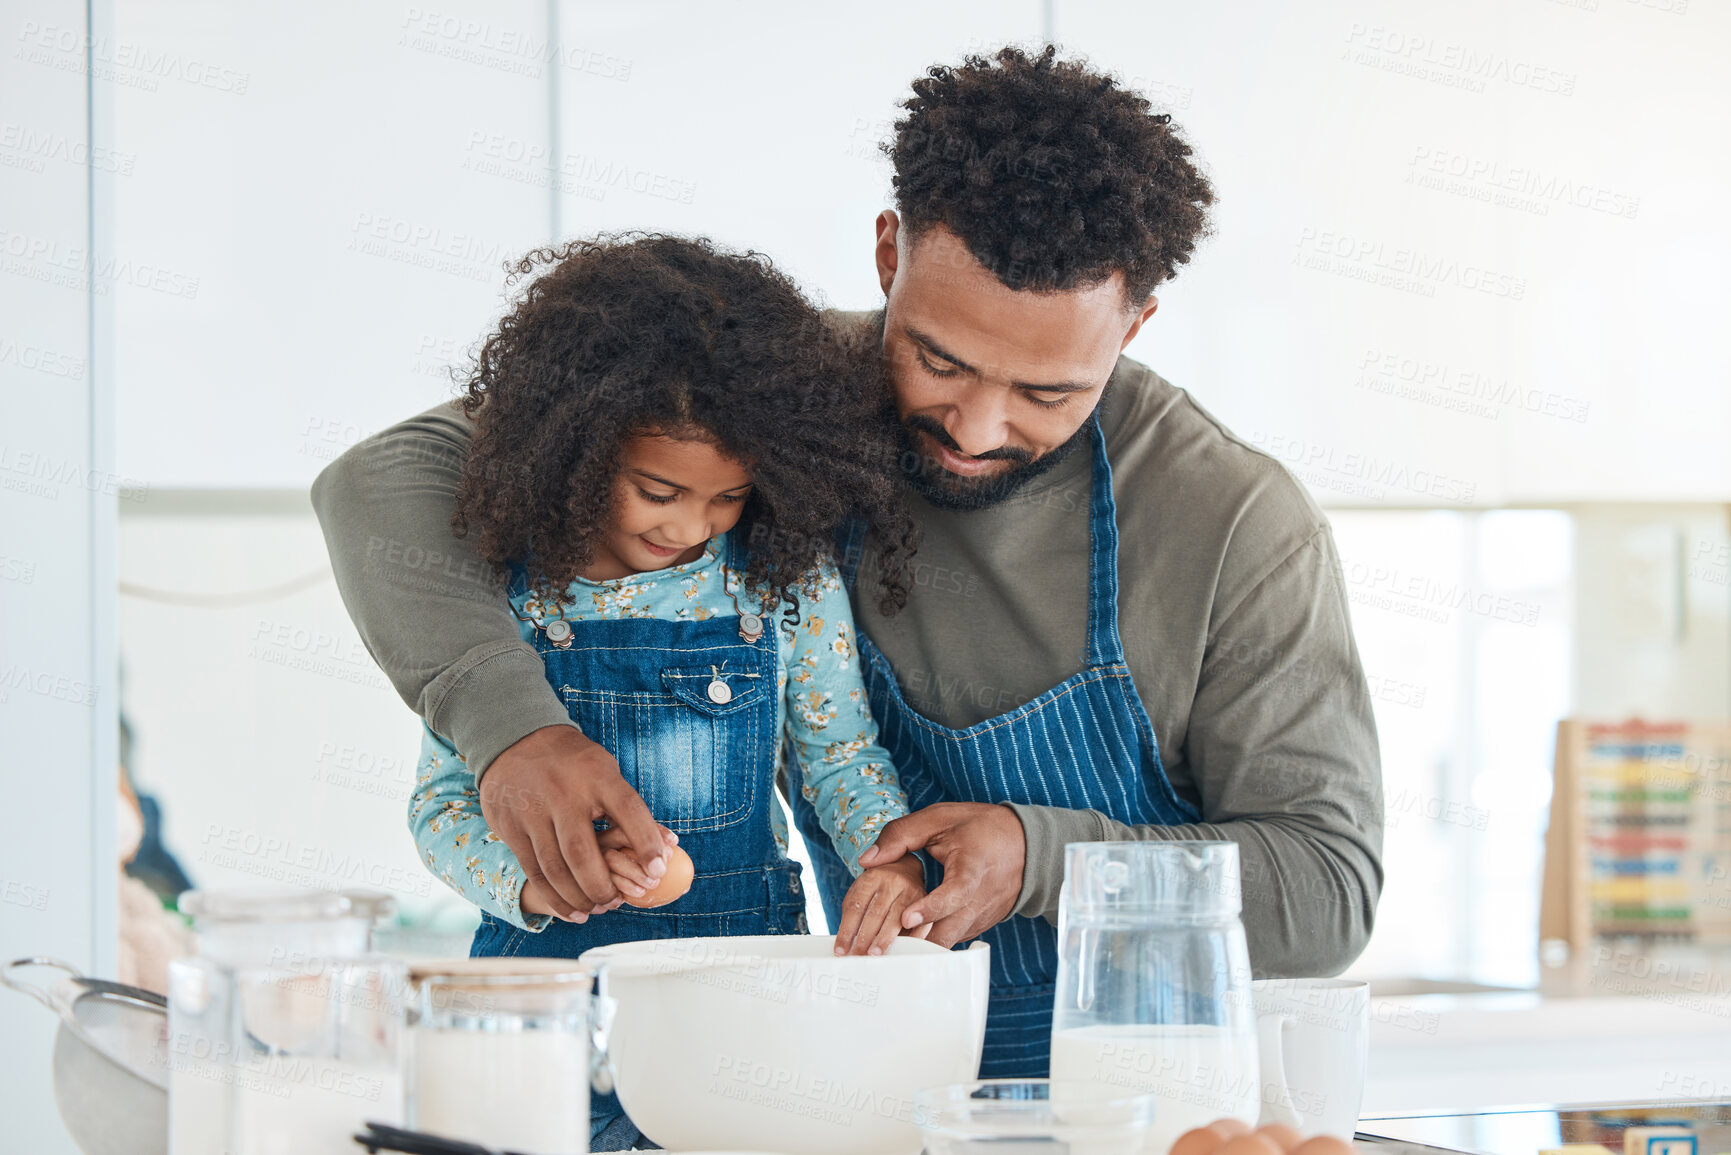 Buy stock photo Cropped shot of a handsome young man and his daughter baking in the kitchen at home